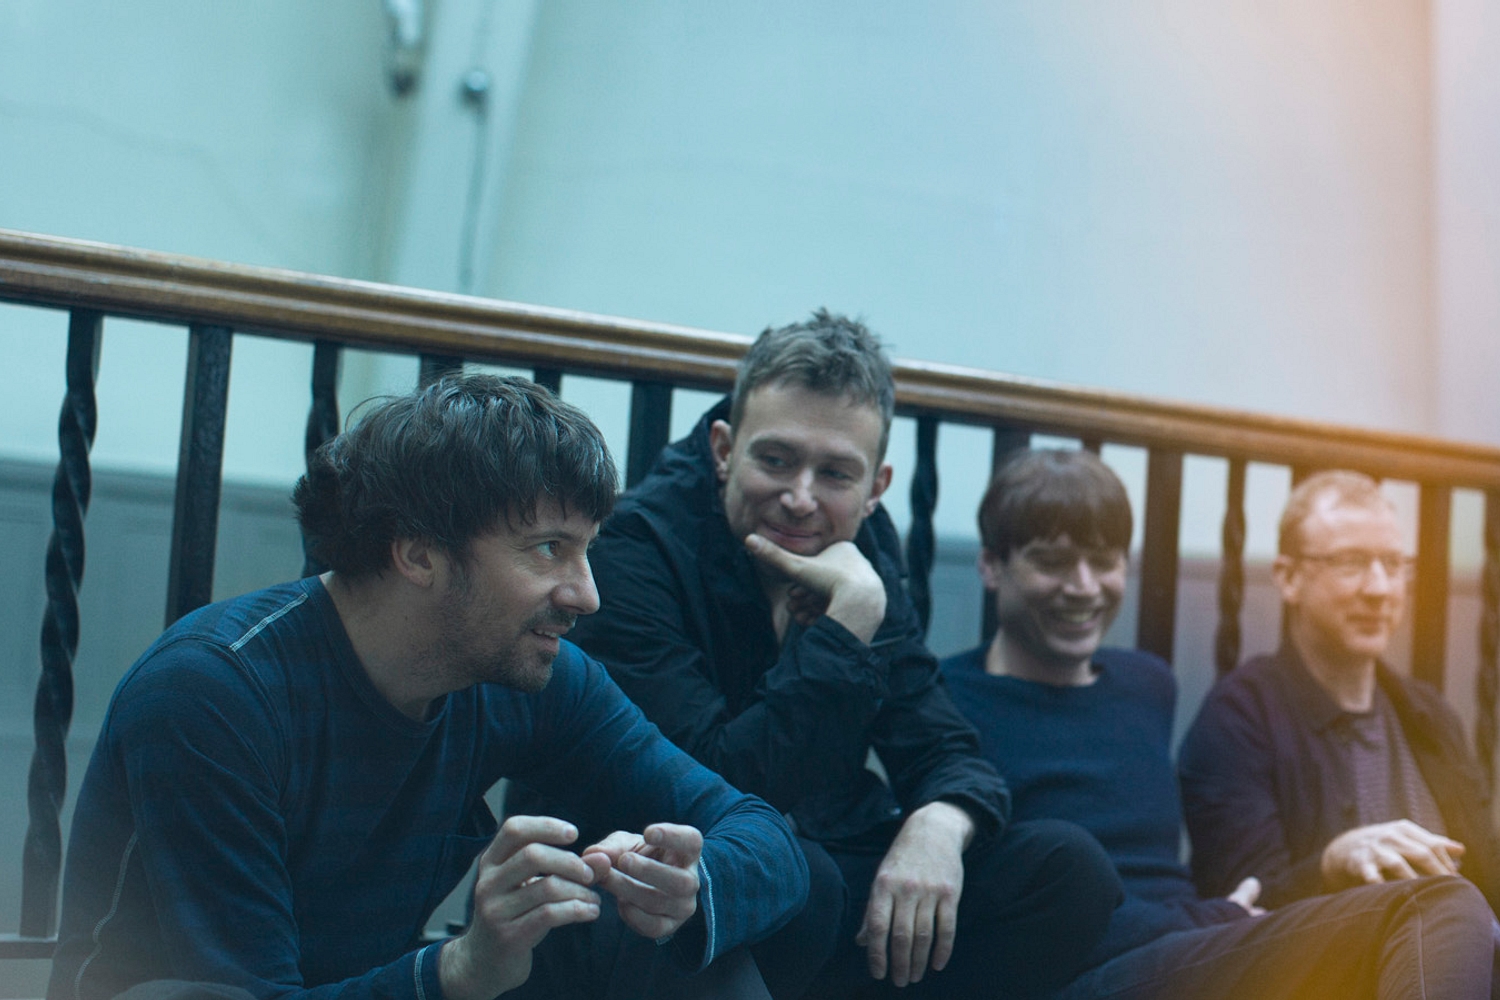 Blur to debut new track next Monday